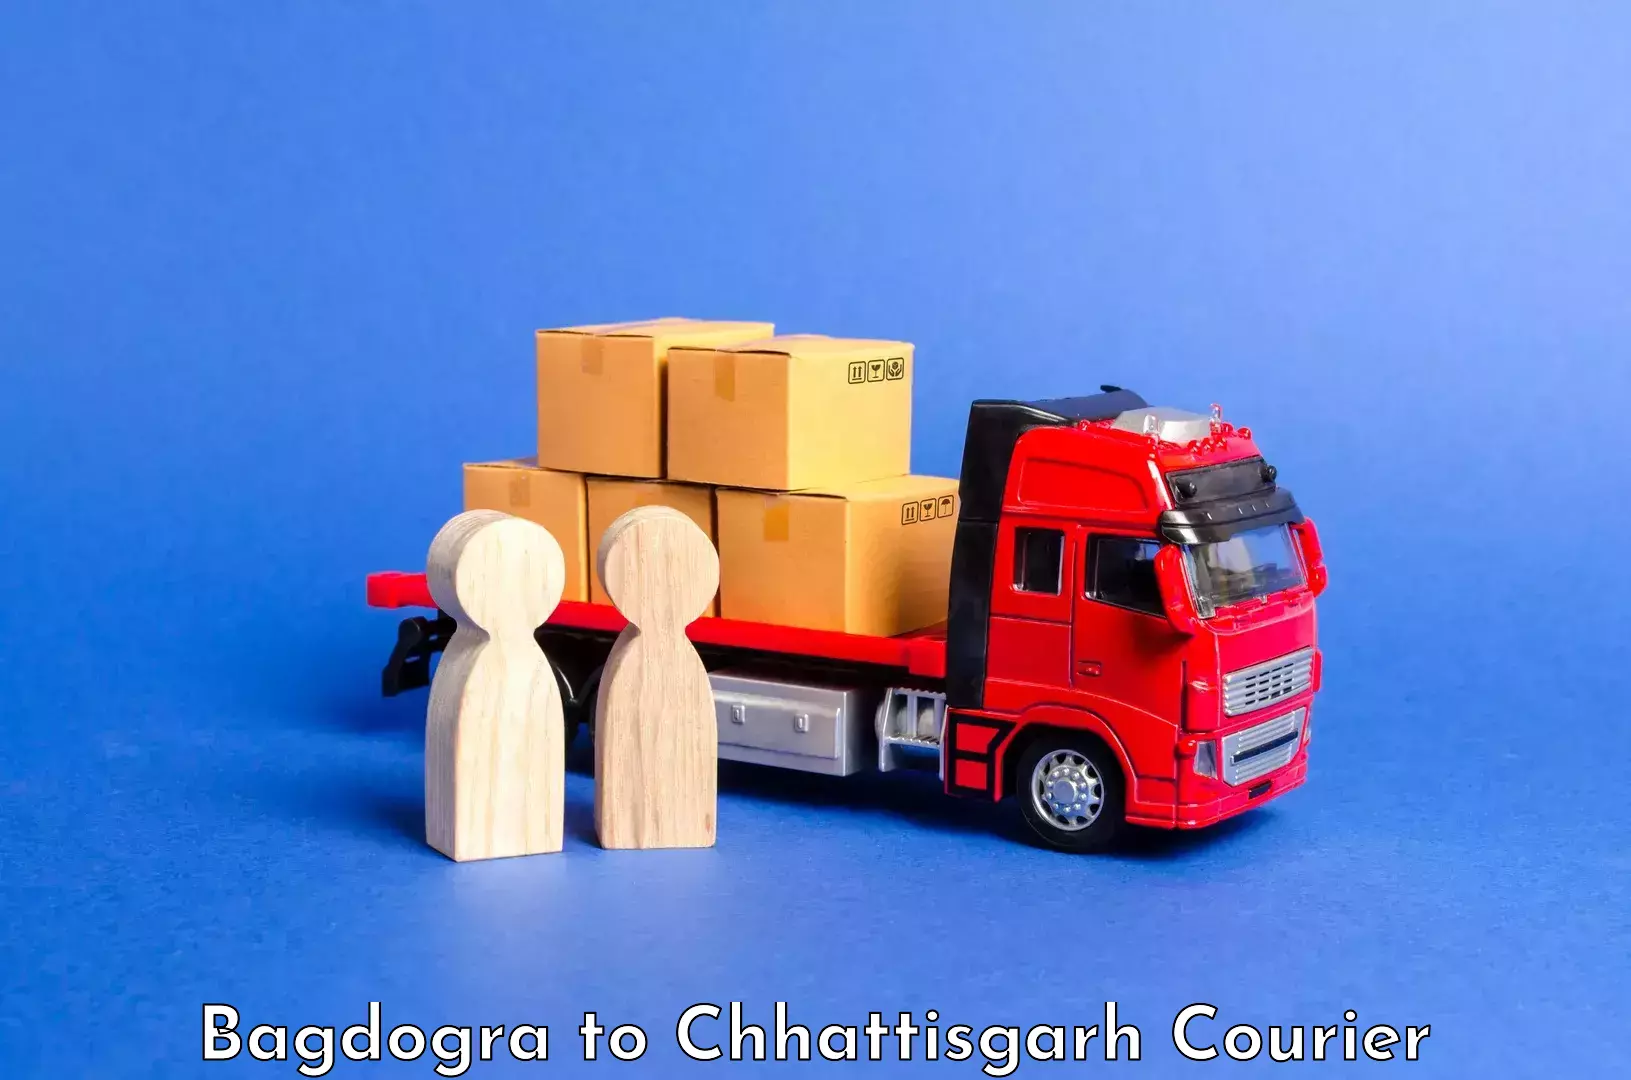 Baggage delivery planning Bagdogra to Dongargarh